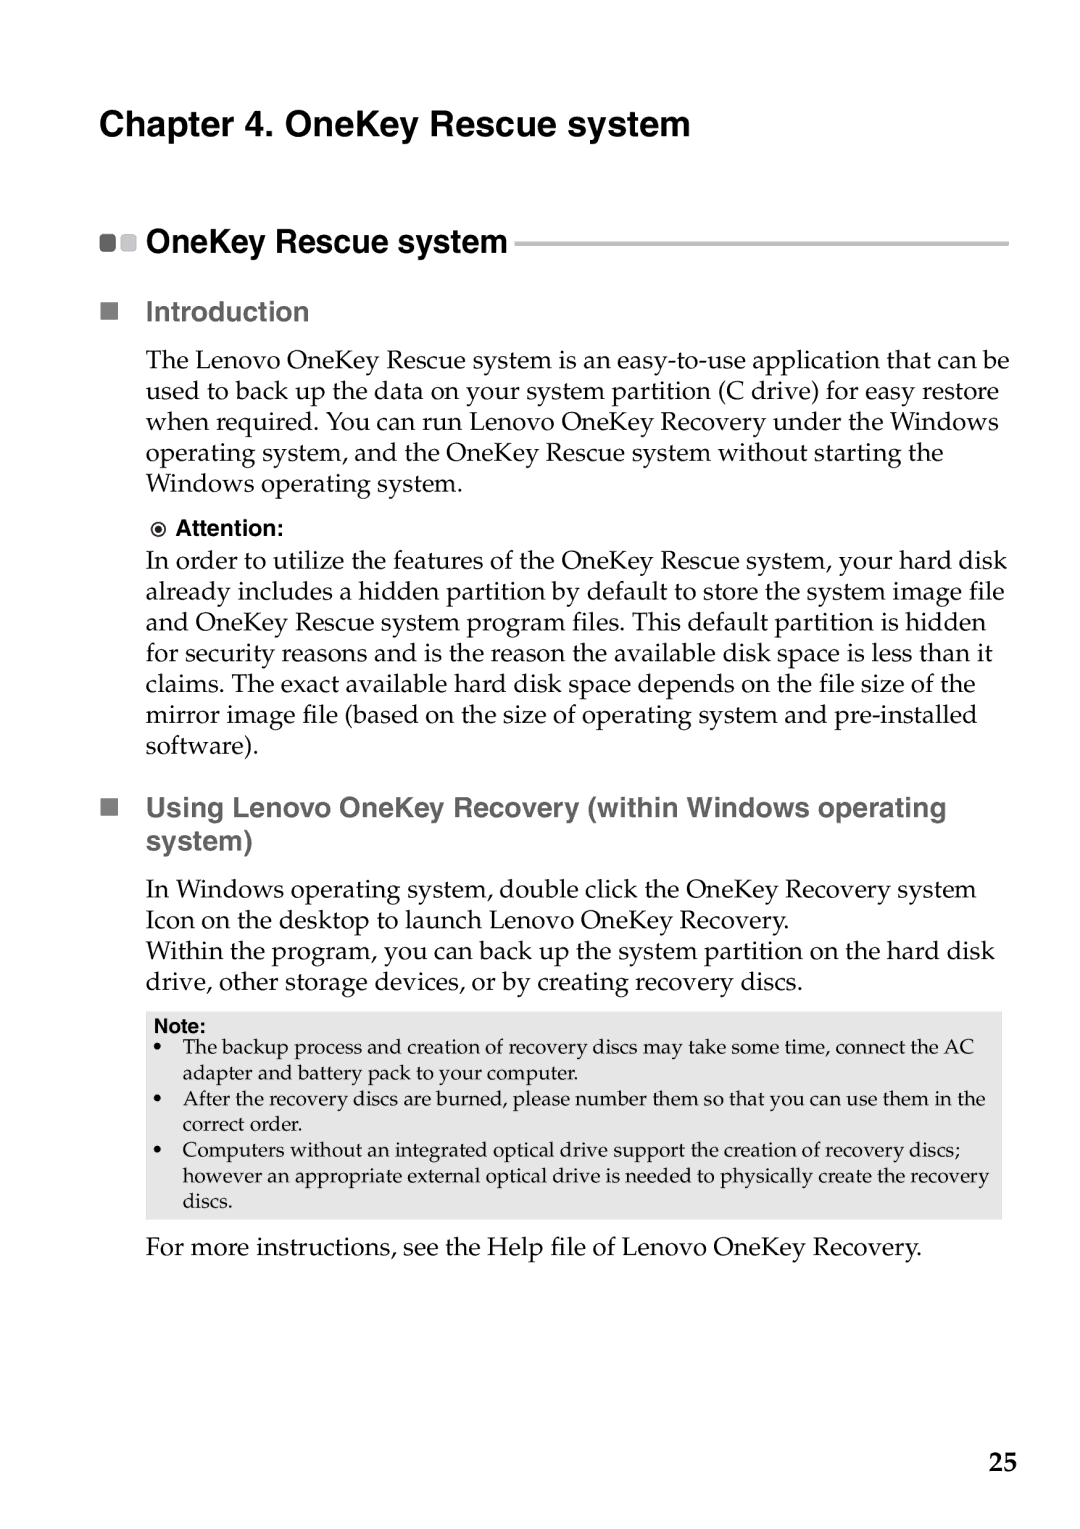 Lenovo S100 manual OneKey Rescue system, „ Introduction 